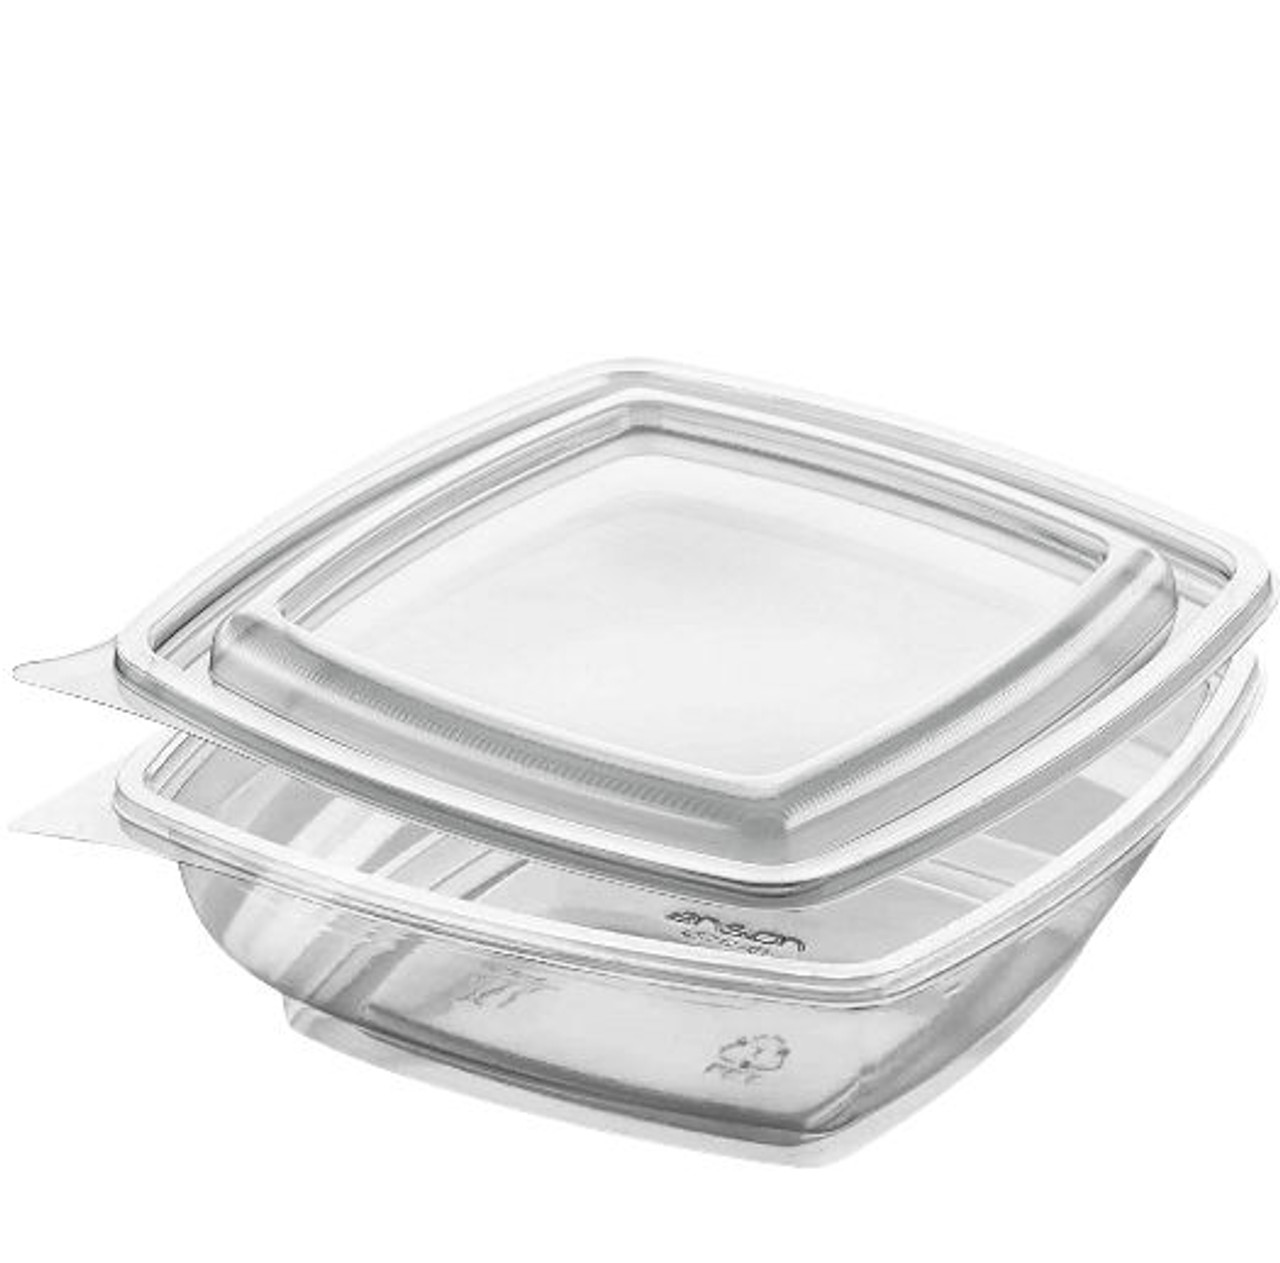 500cc Plaza Clear Bowls with or without lids ( see qty options )